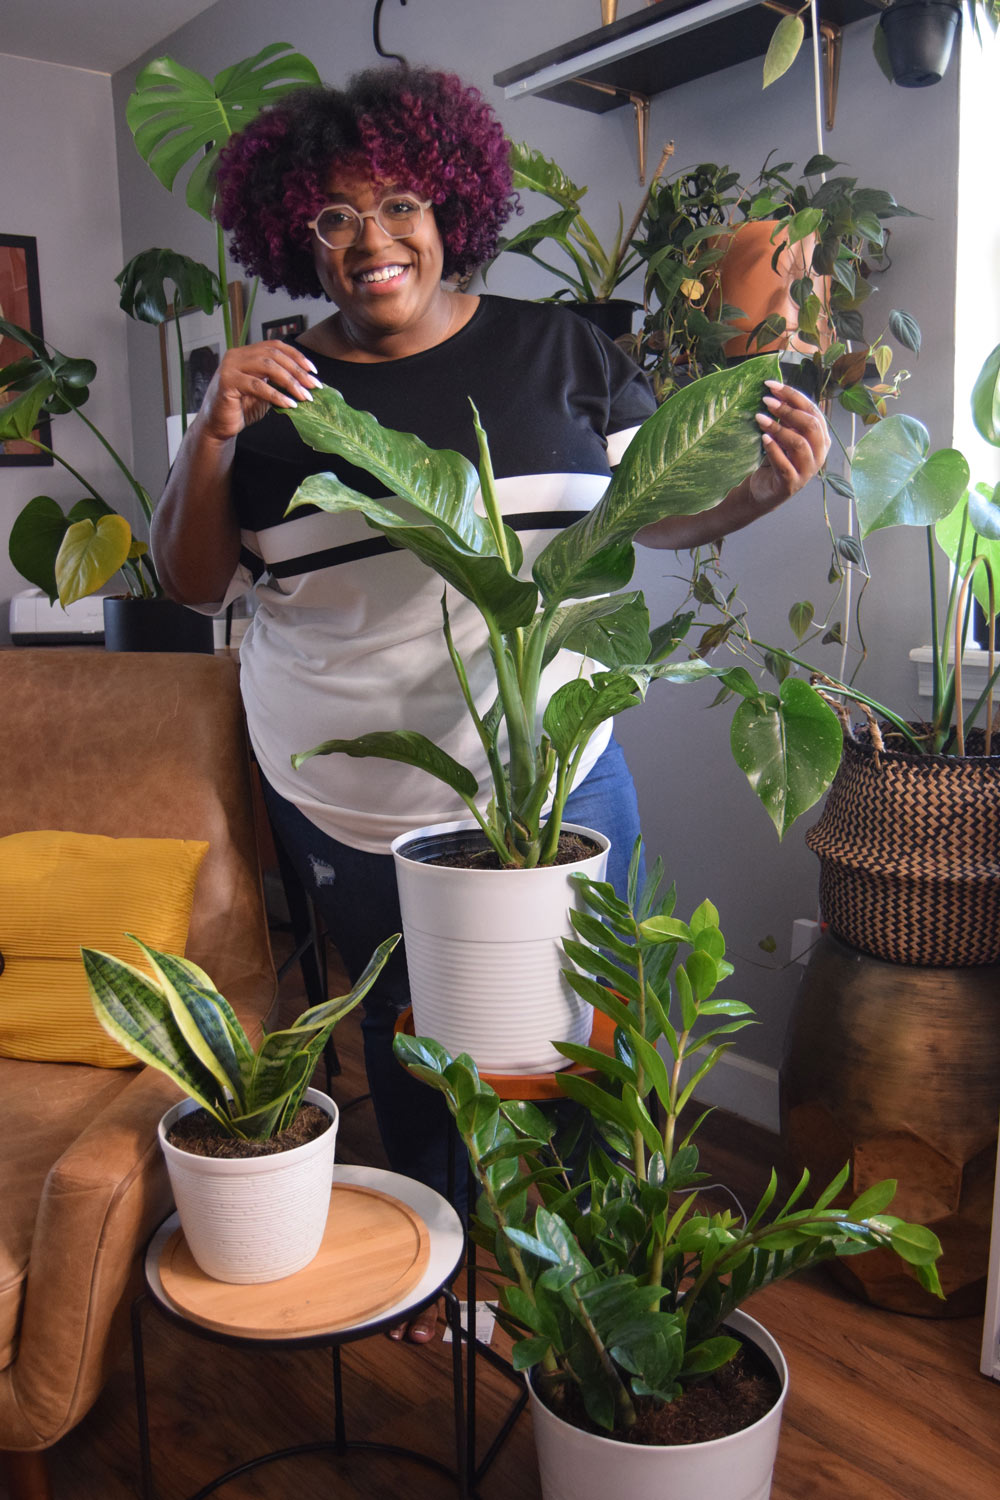  A woman standing behind multiple plants and holding leaves.